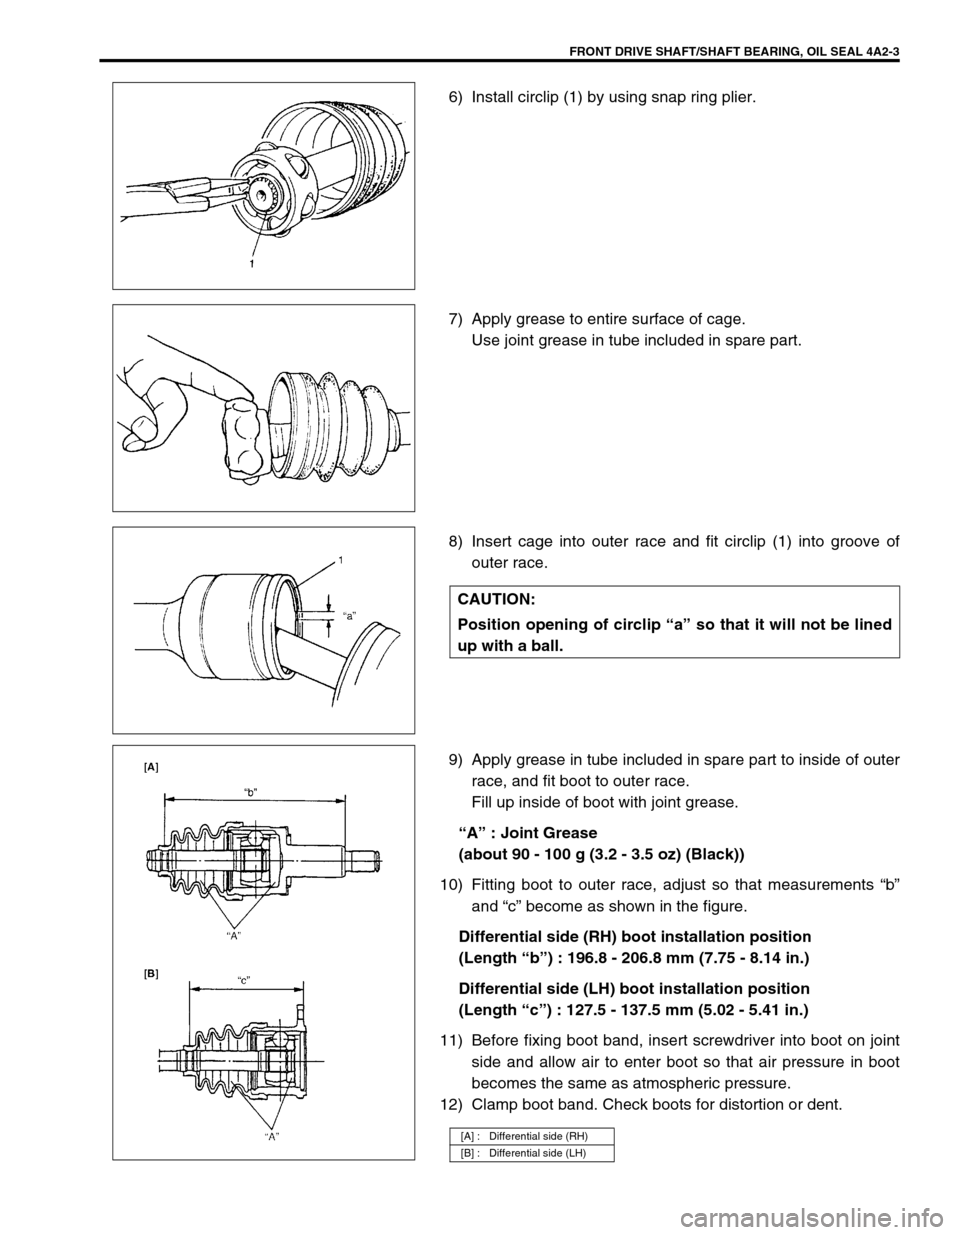 SUZUKI GRAND VITARA 2001 2.G Owners Manual FRONT DRIVE SHAFT/SHAFT BEARING, OIL SEAL 4A2-3
6) Install circlip (1) by using snap ring plier.
7) Apply grease to entire surface of cage. 
Use joint grease in tube included in spare part.
8) Insert 